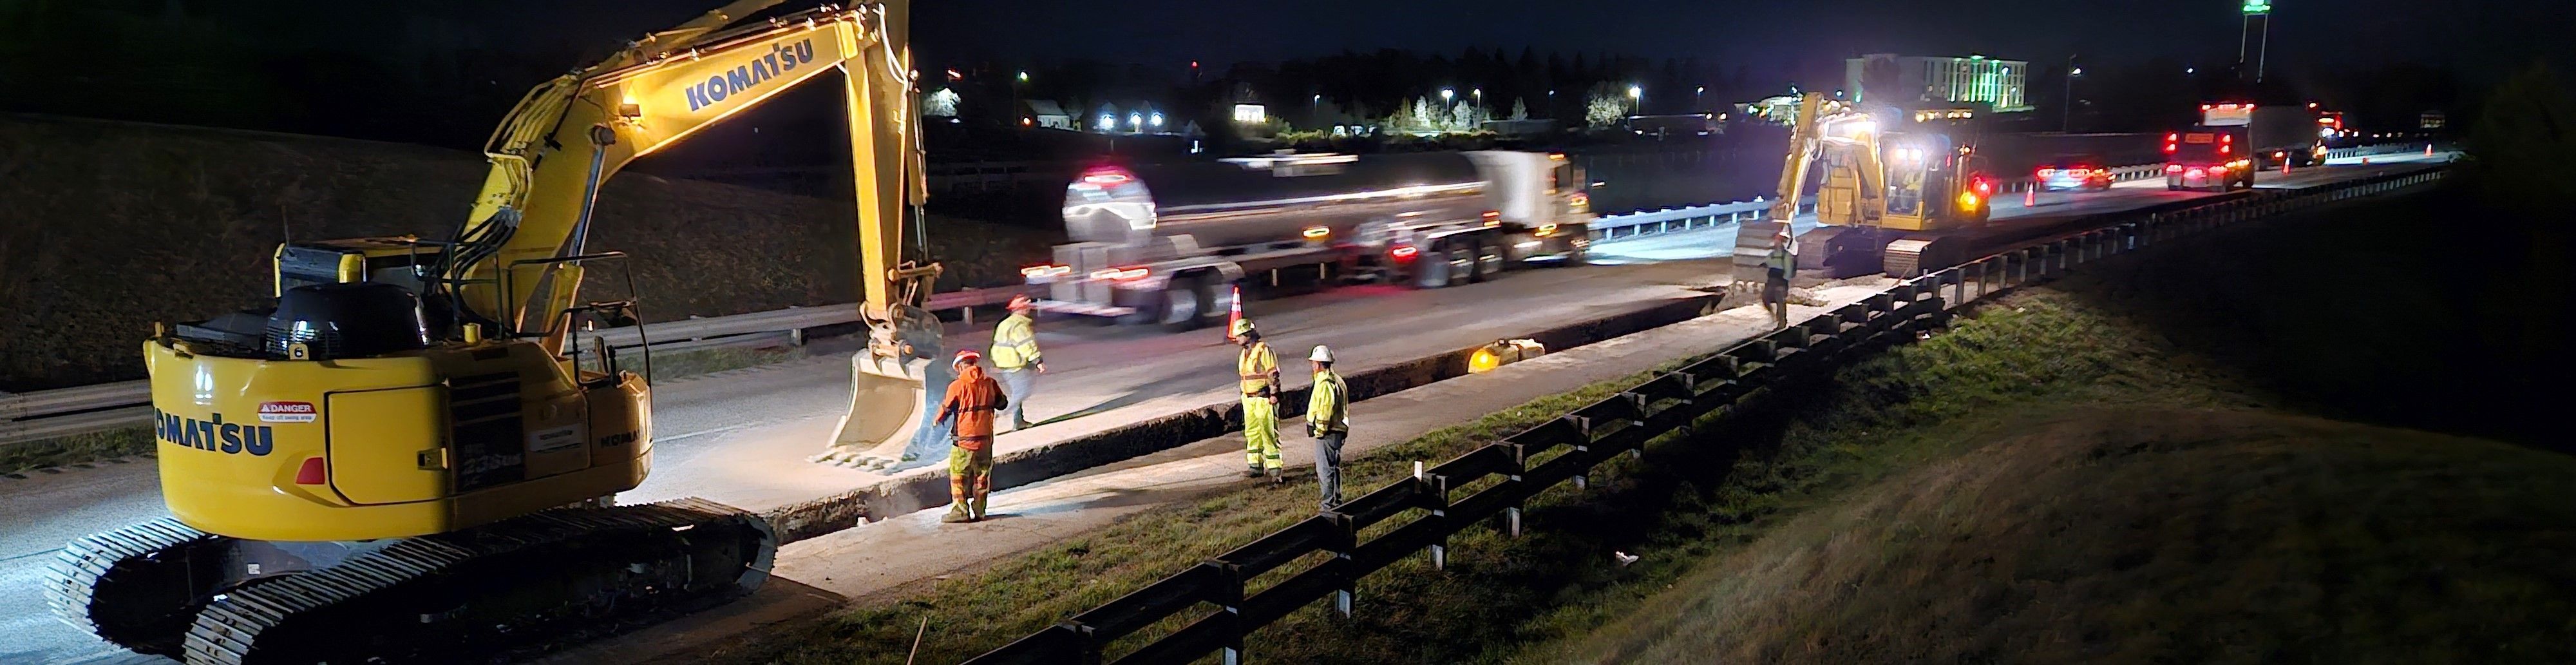 Construction on 81 at night for shoulder widening